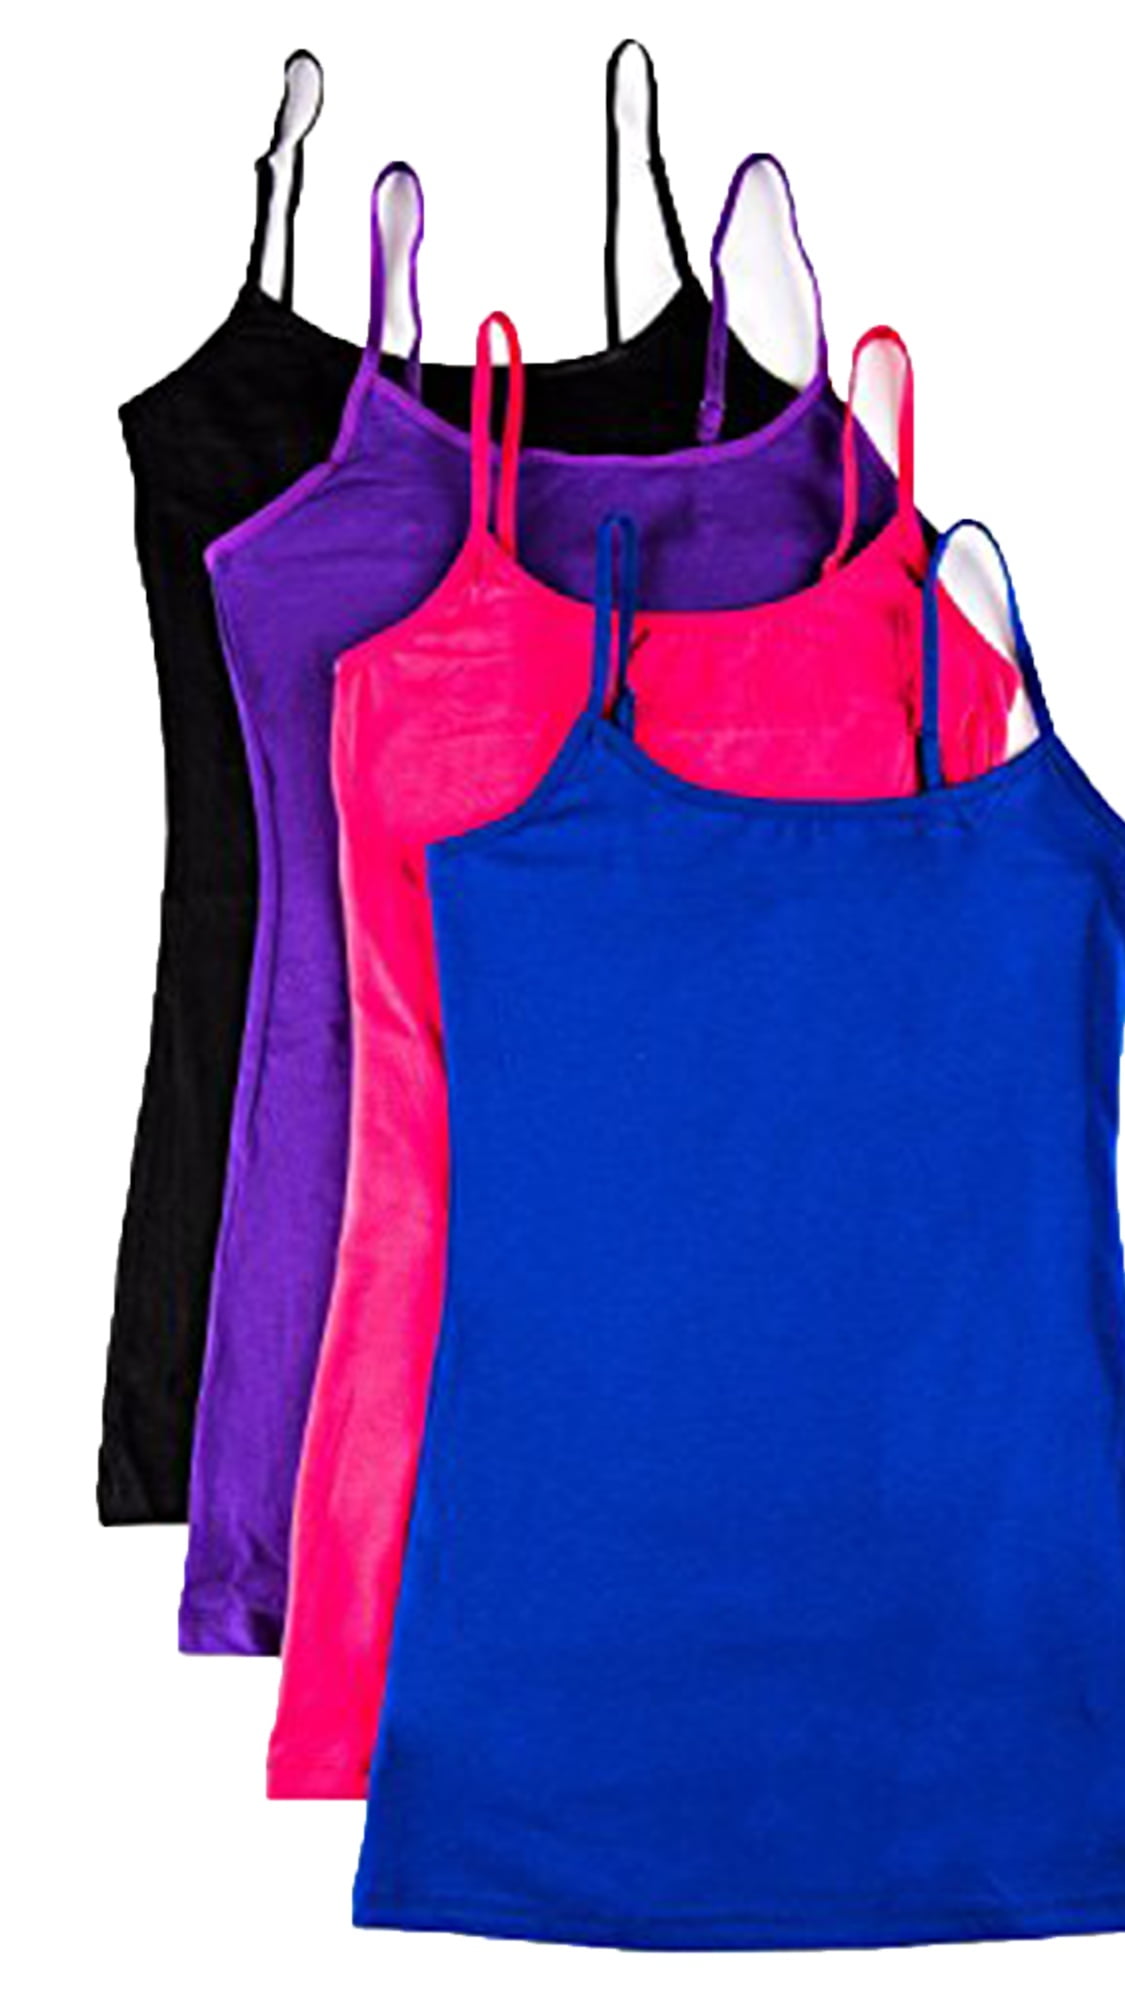 Essential Basic Women Value Pack Long Camisole Cami - Black, Black, Black,  Black, Large